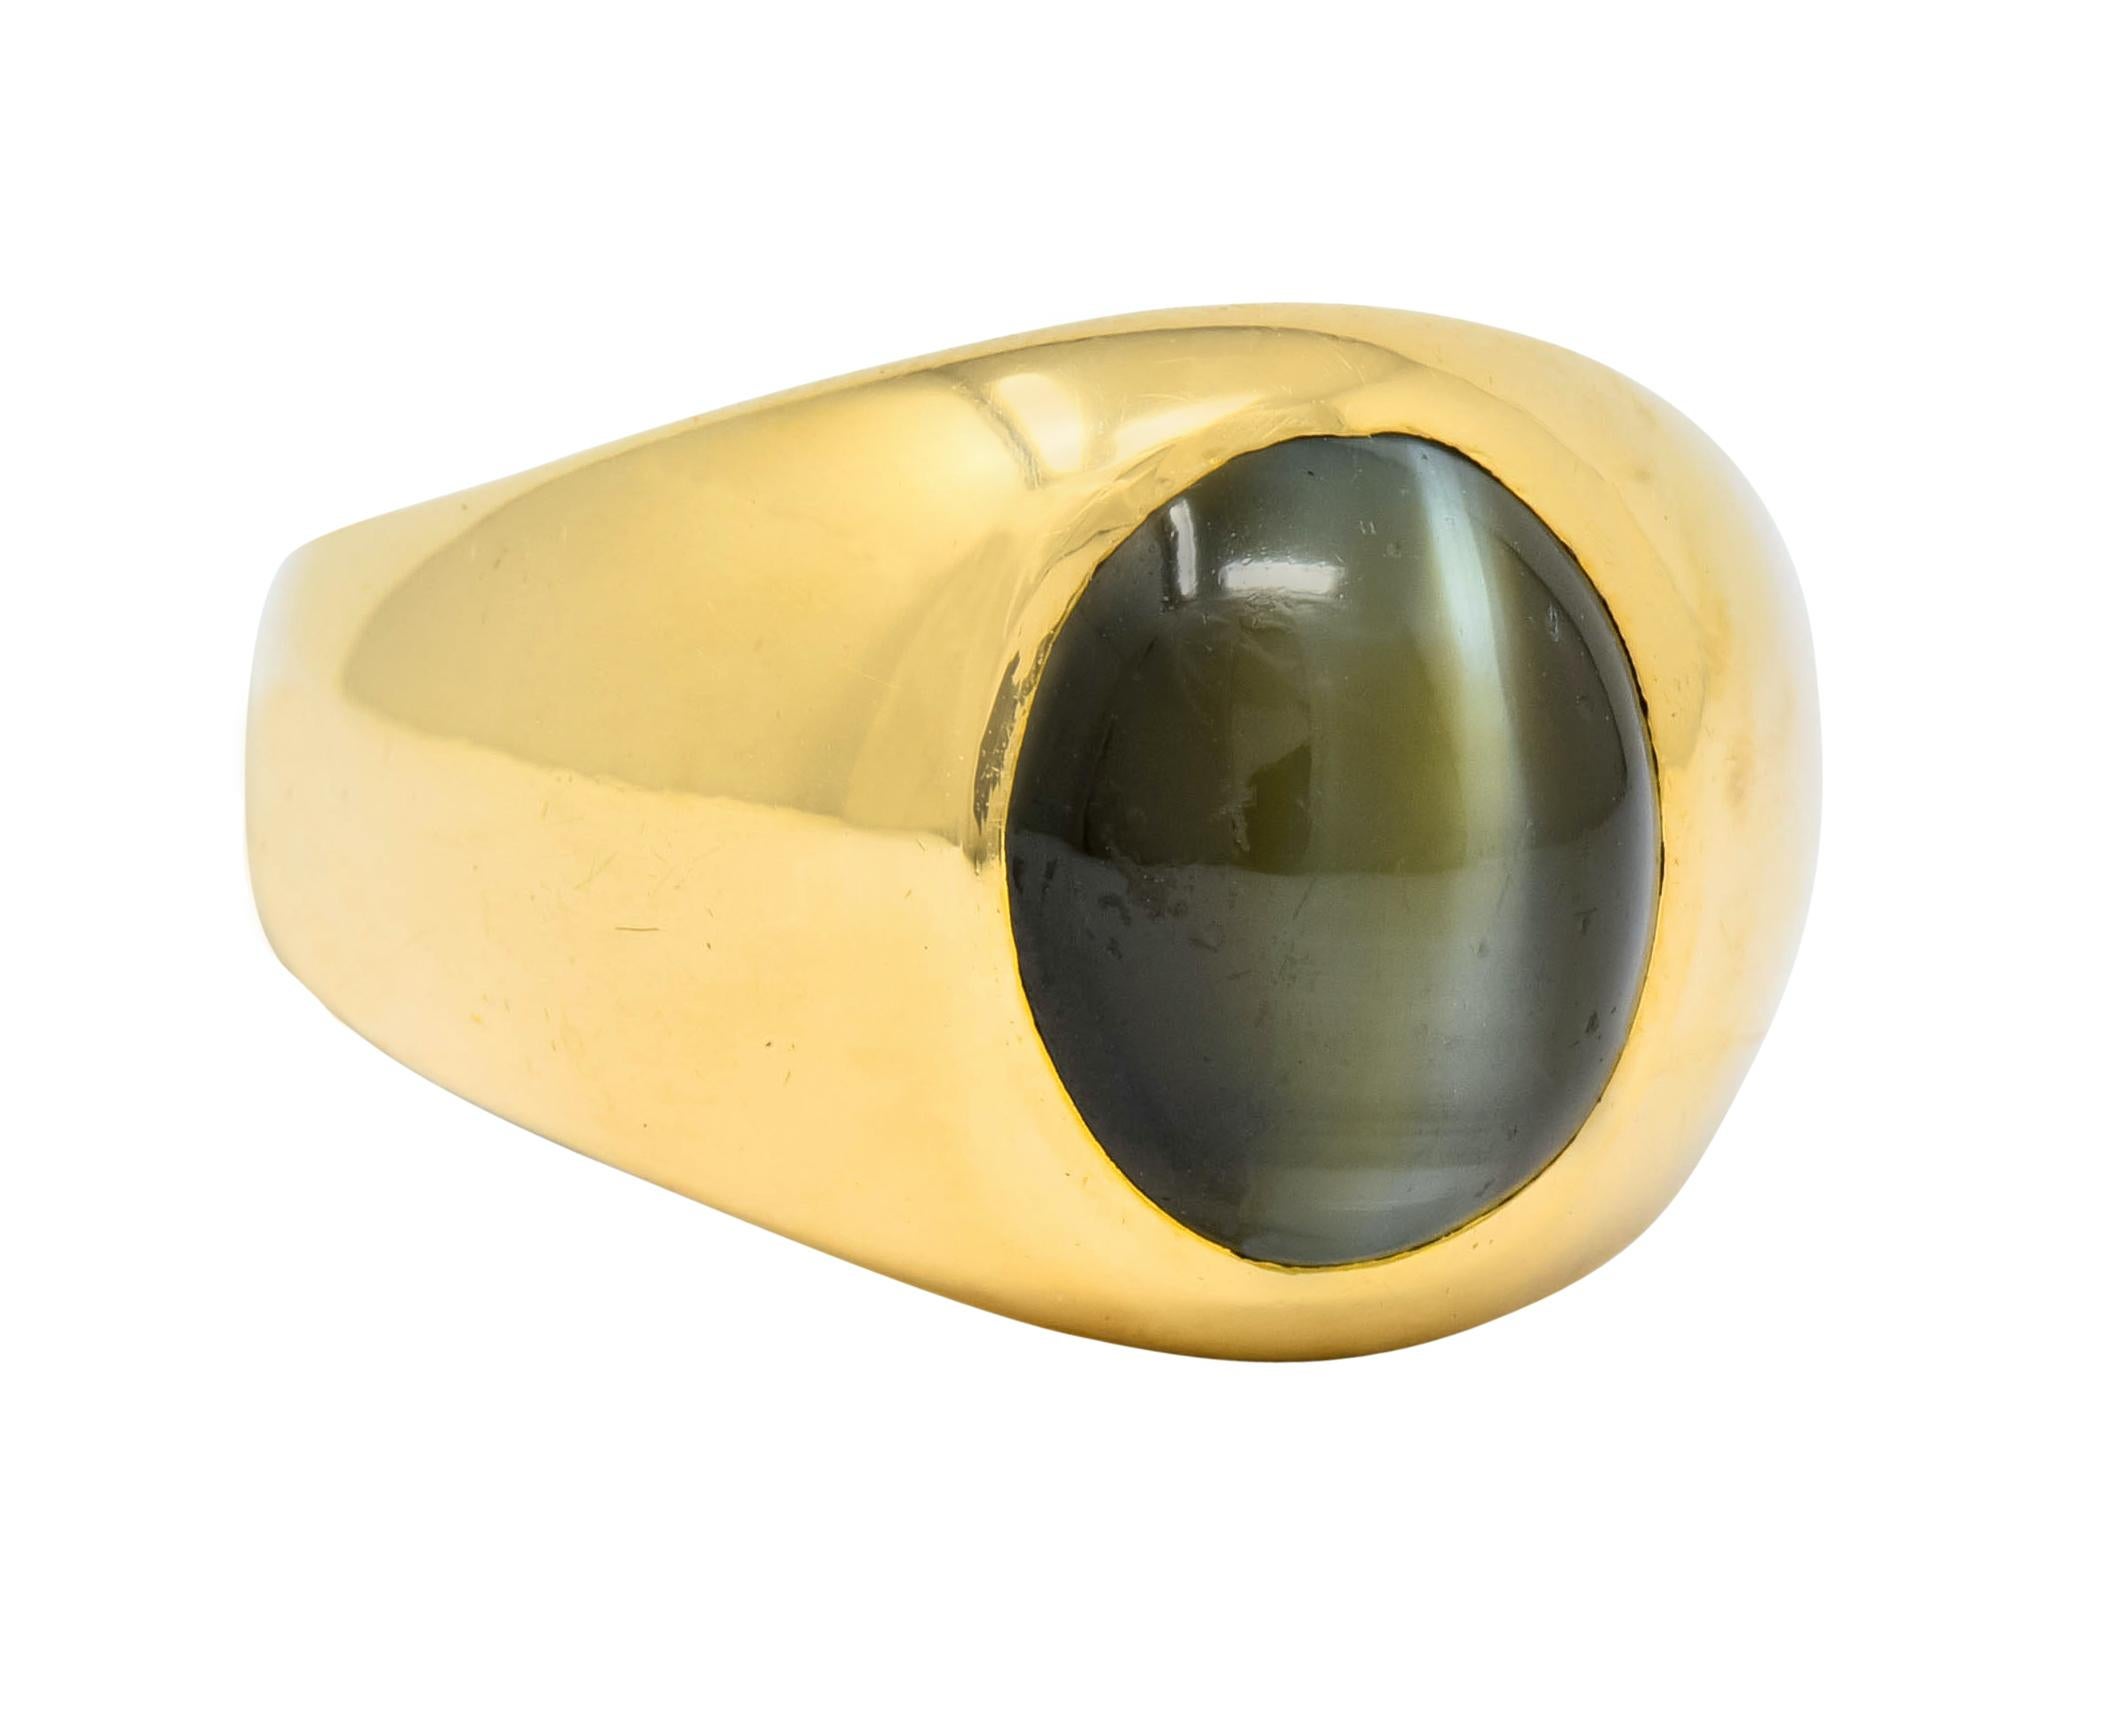 Centering an oval cabochon cat's eye, measuring approximate 11.3 x 9.5 mm

Cat's eye with deep slightly yellowish green with a straight, distinct eye and milk & honey effect

Flush set in high polished gold

Stamped 18K

Ring Size: 7 1/4

Top